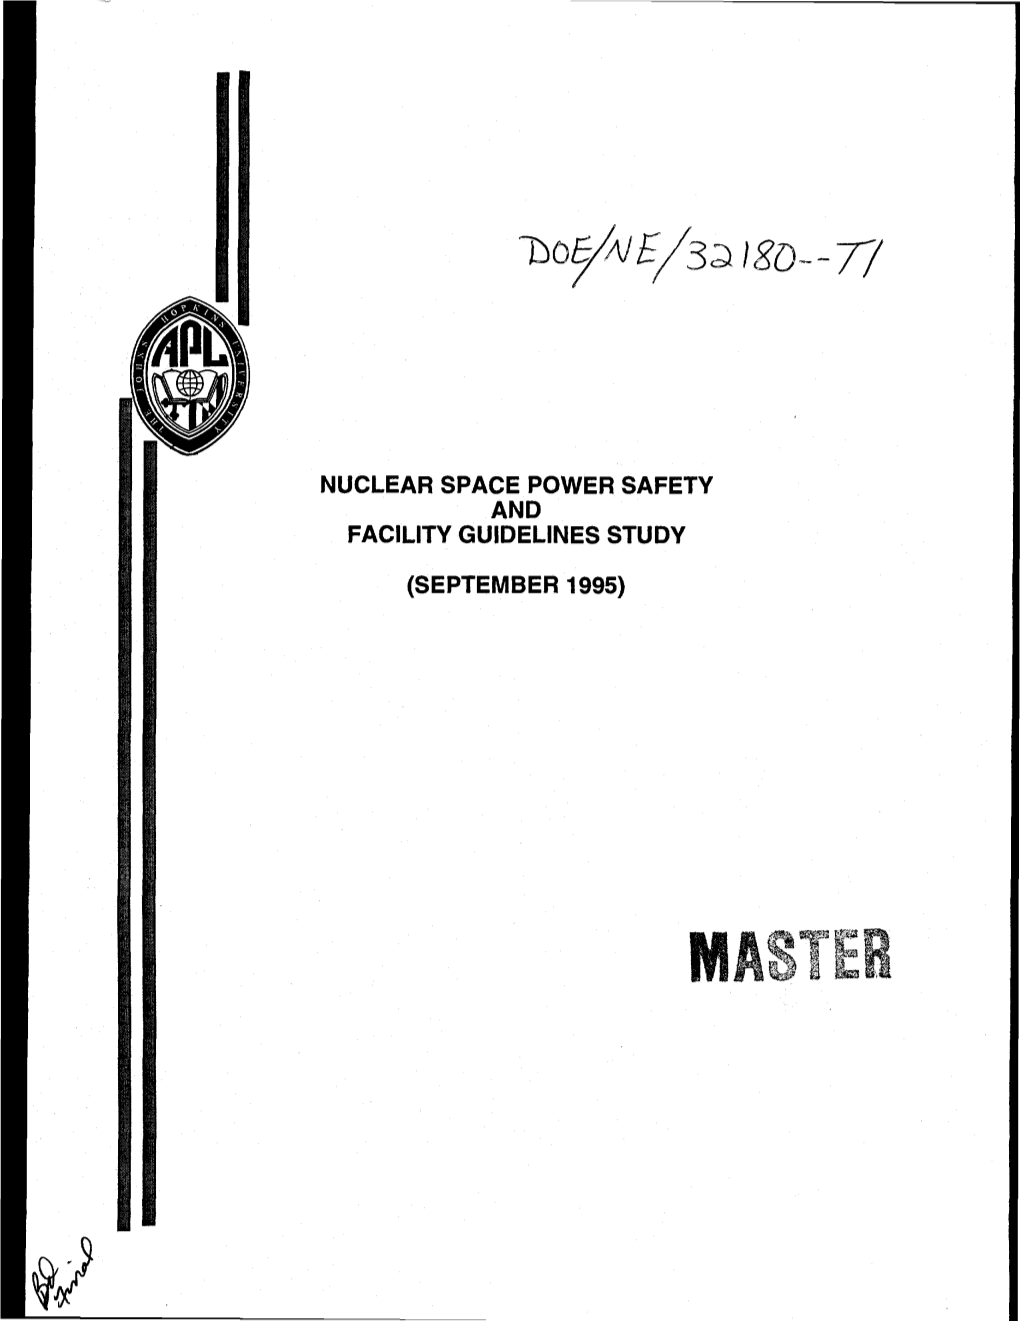 Nuclear Space Power Safety and Facility Guidelines Study